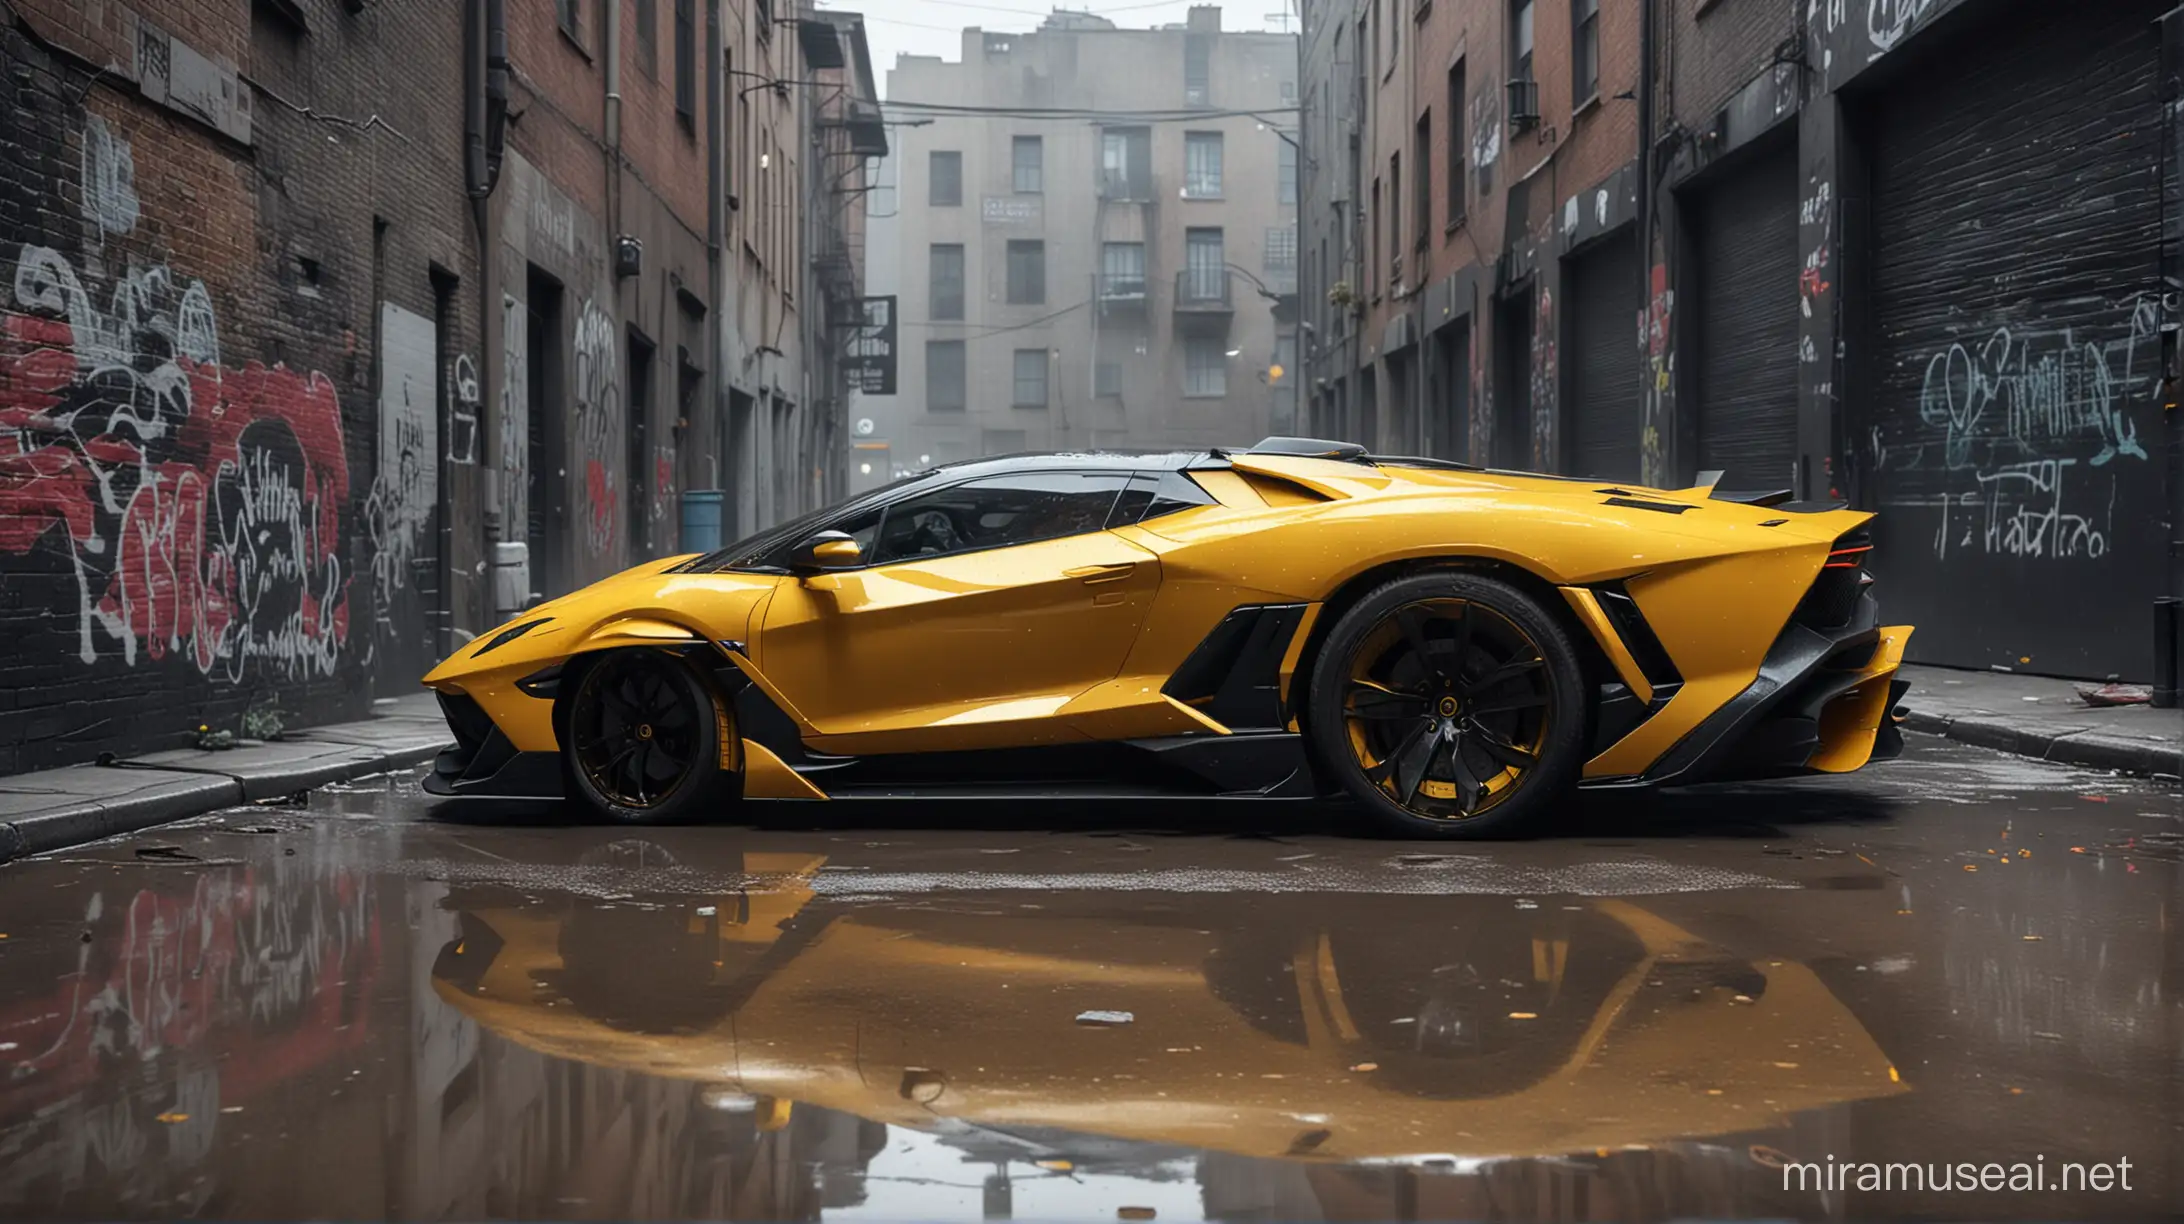 A stunning 3D rendering of a sleek and powerful black Lamborghini Sian Roadster from 2024, captured on a cracked asphalt alleyway. The car stands out in contrast to the wet pavement, having a matte gray finish that contrasts with the graffiti-covered walls displaying the name "Amaury." The black rims highlight the yellow Brembo brakes. The electric storm atmosphere, with the dark sky and lightning illuminating the scene, adds to the dramatic effect. This cinematic, 3D rendering, poster, illustration, painting, and photography blend together to create a captivating and visually striking image.